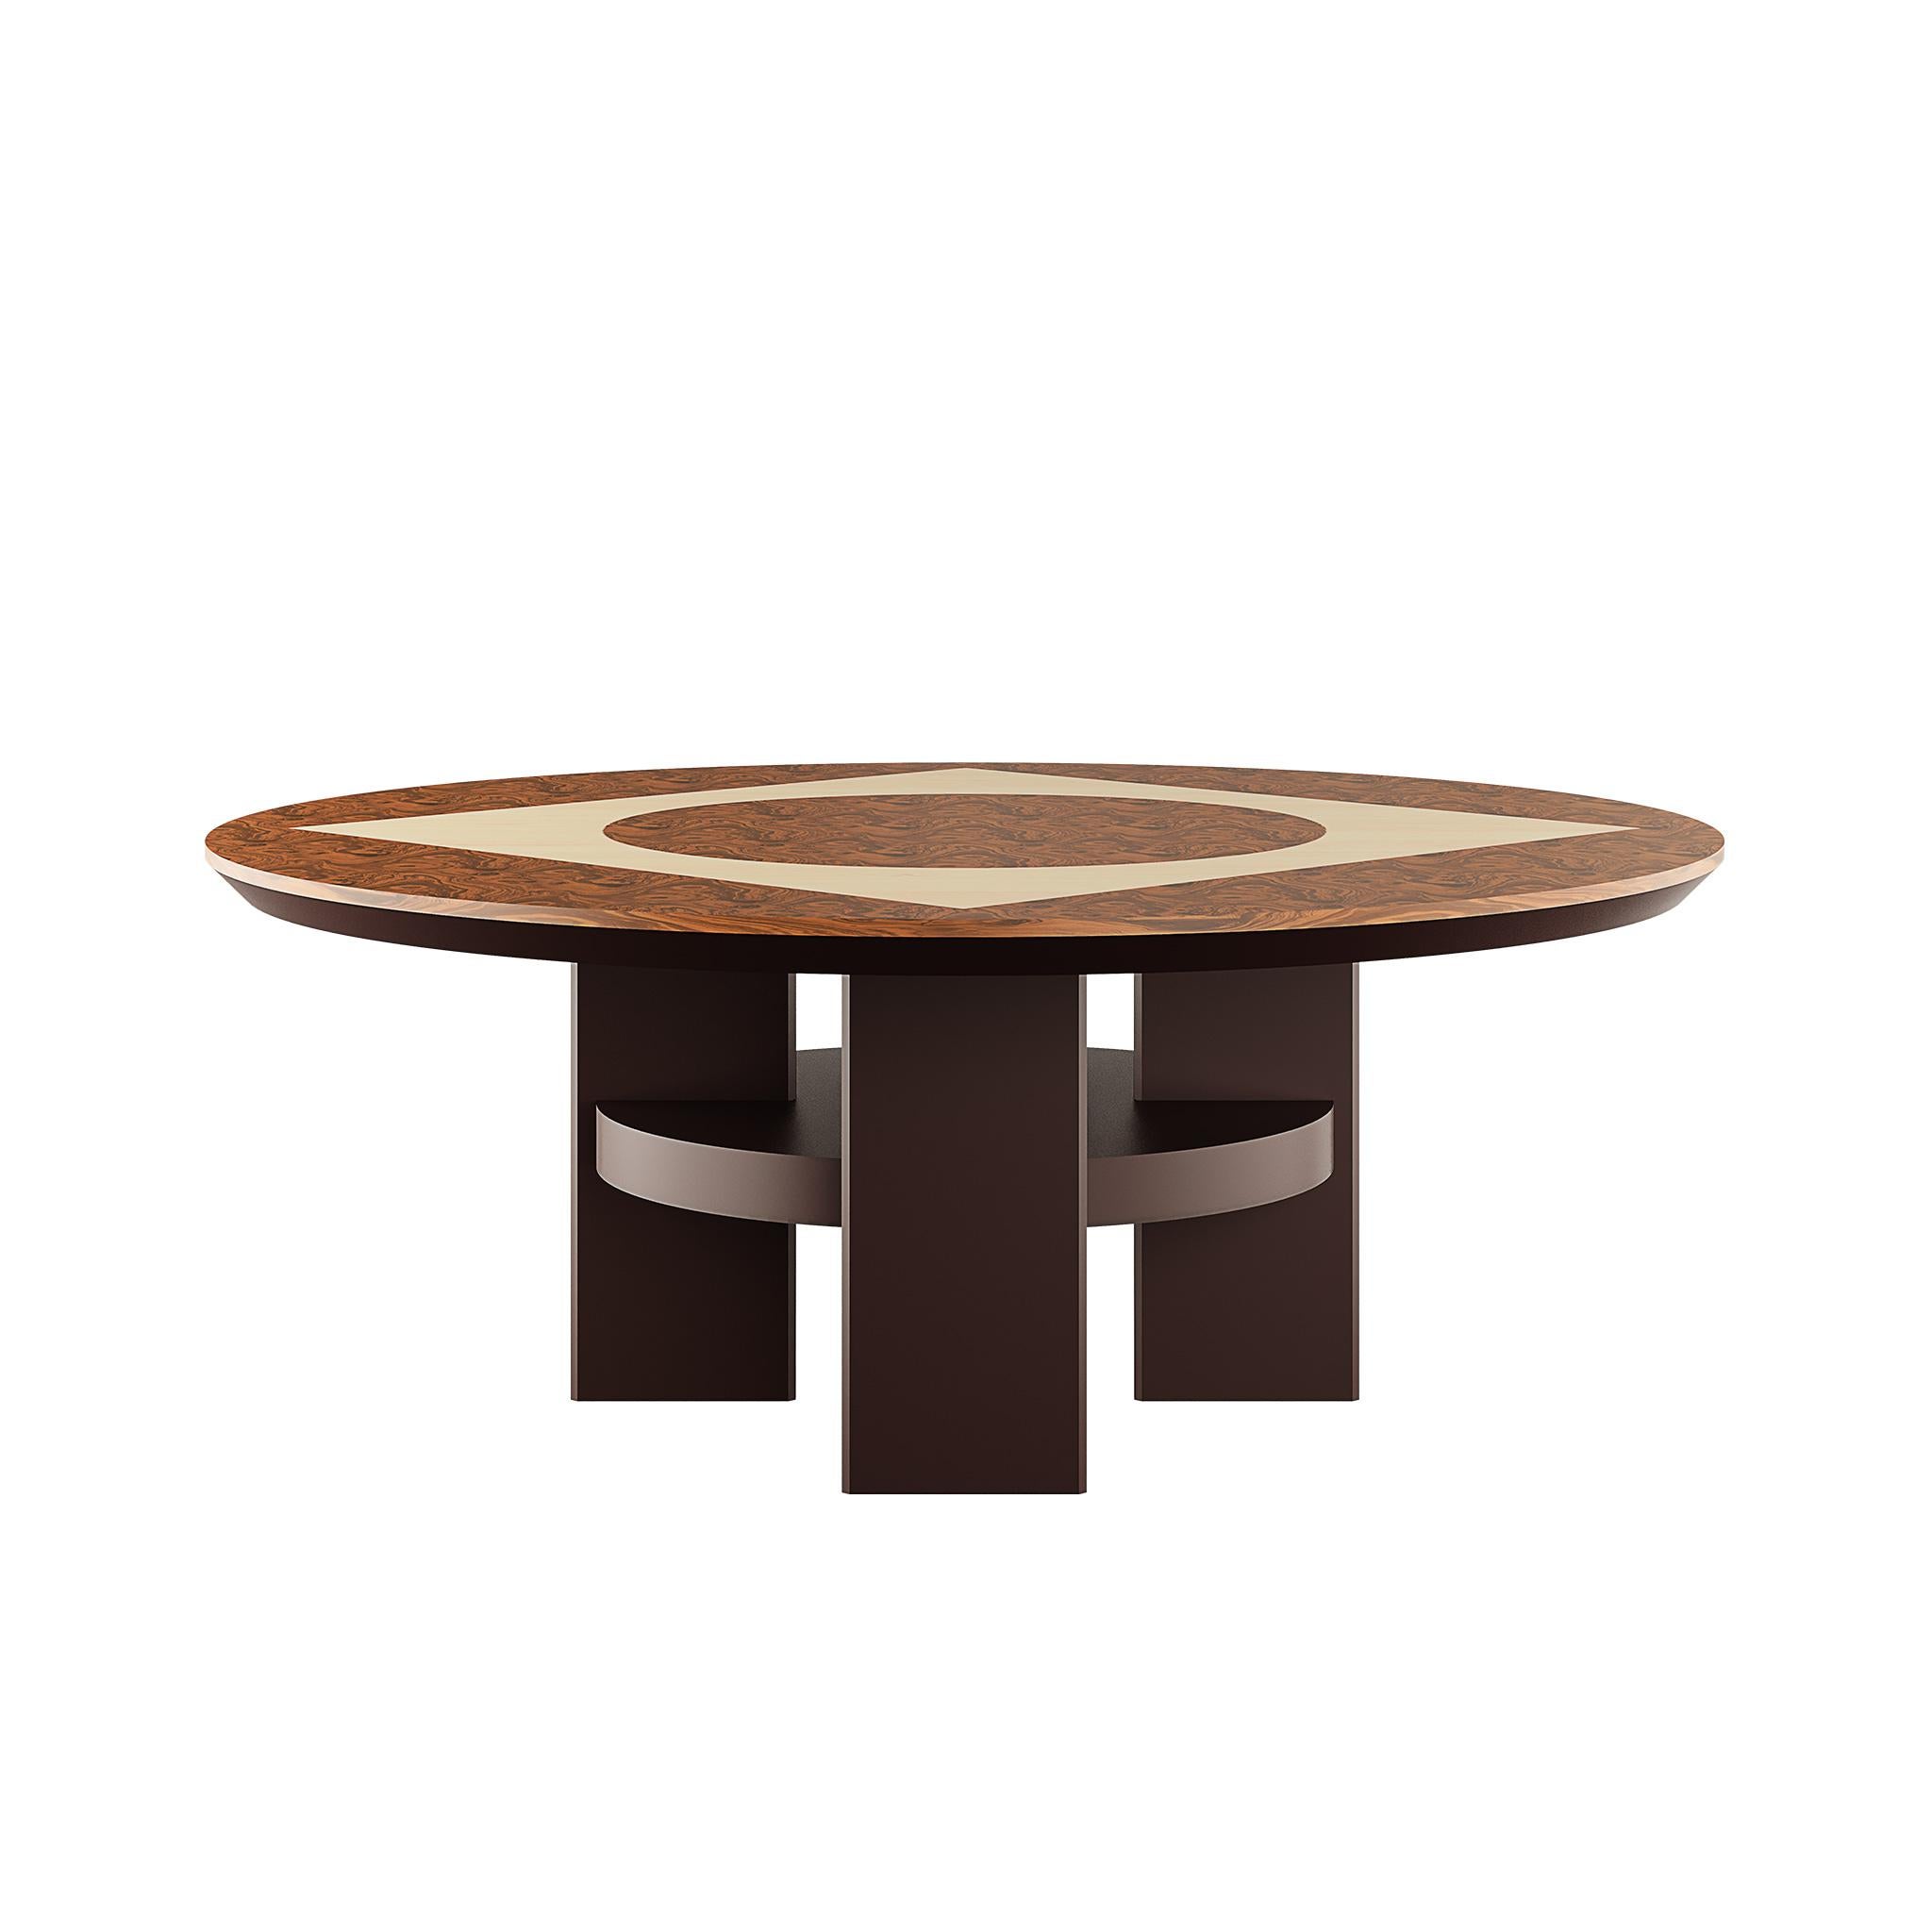 Modern Dining Table Marquetry Walnut Root, White Toulipier Feet Chocolate Brown In New Condition For Sale In Porto, Vila Nova de Gaia